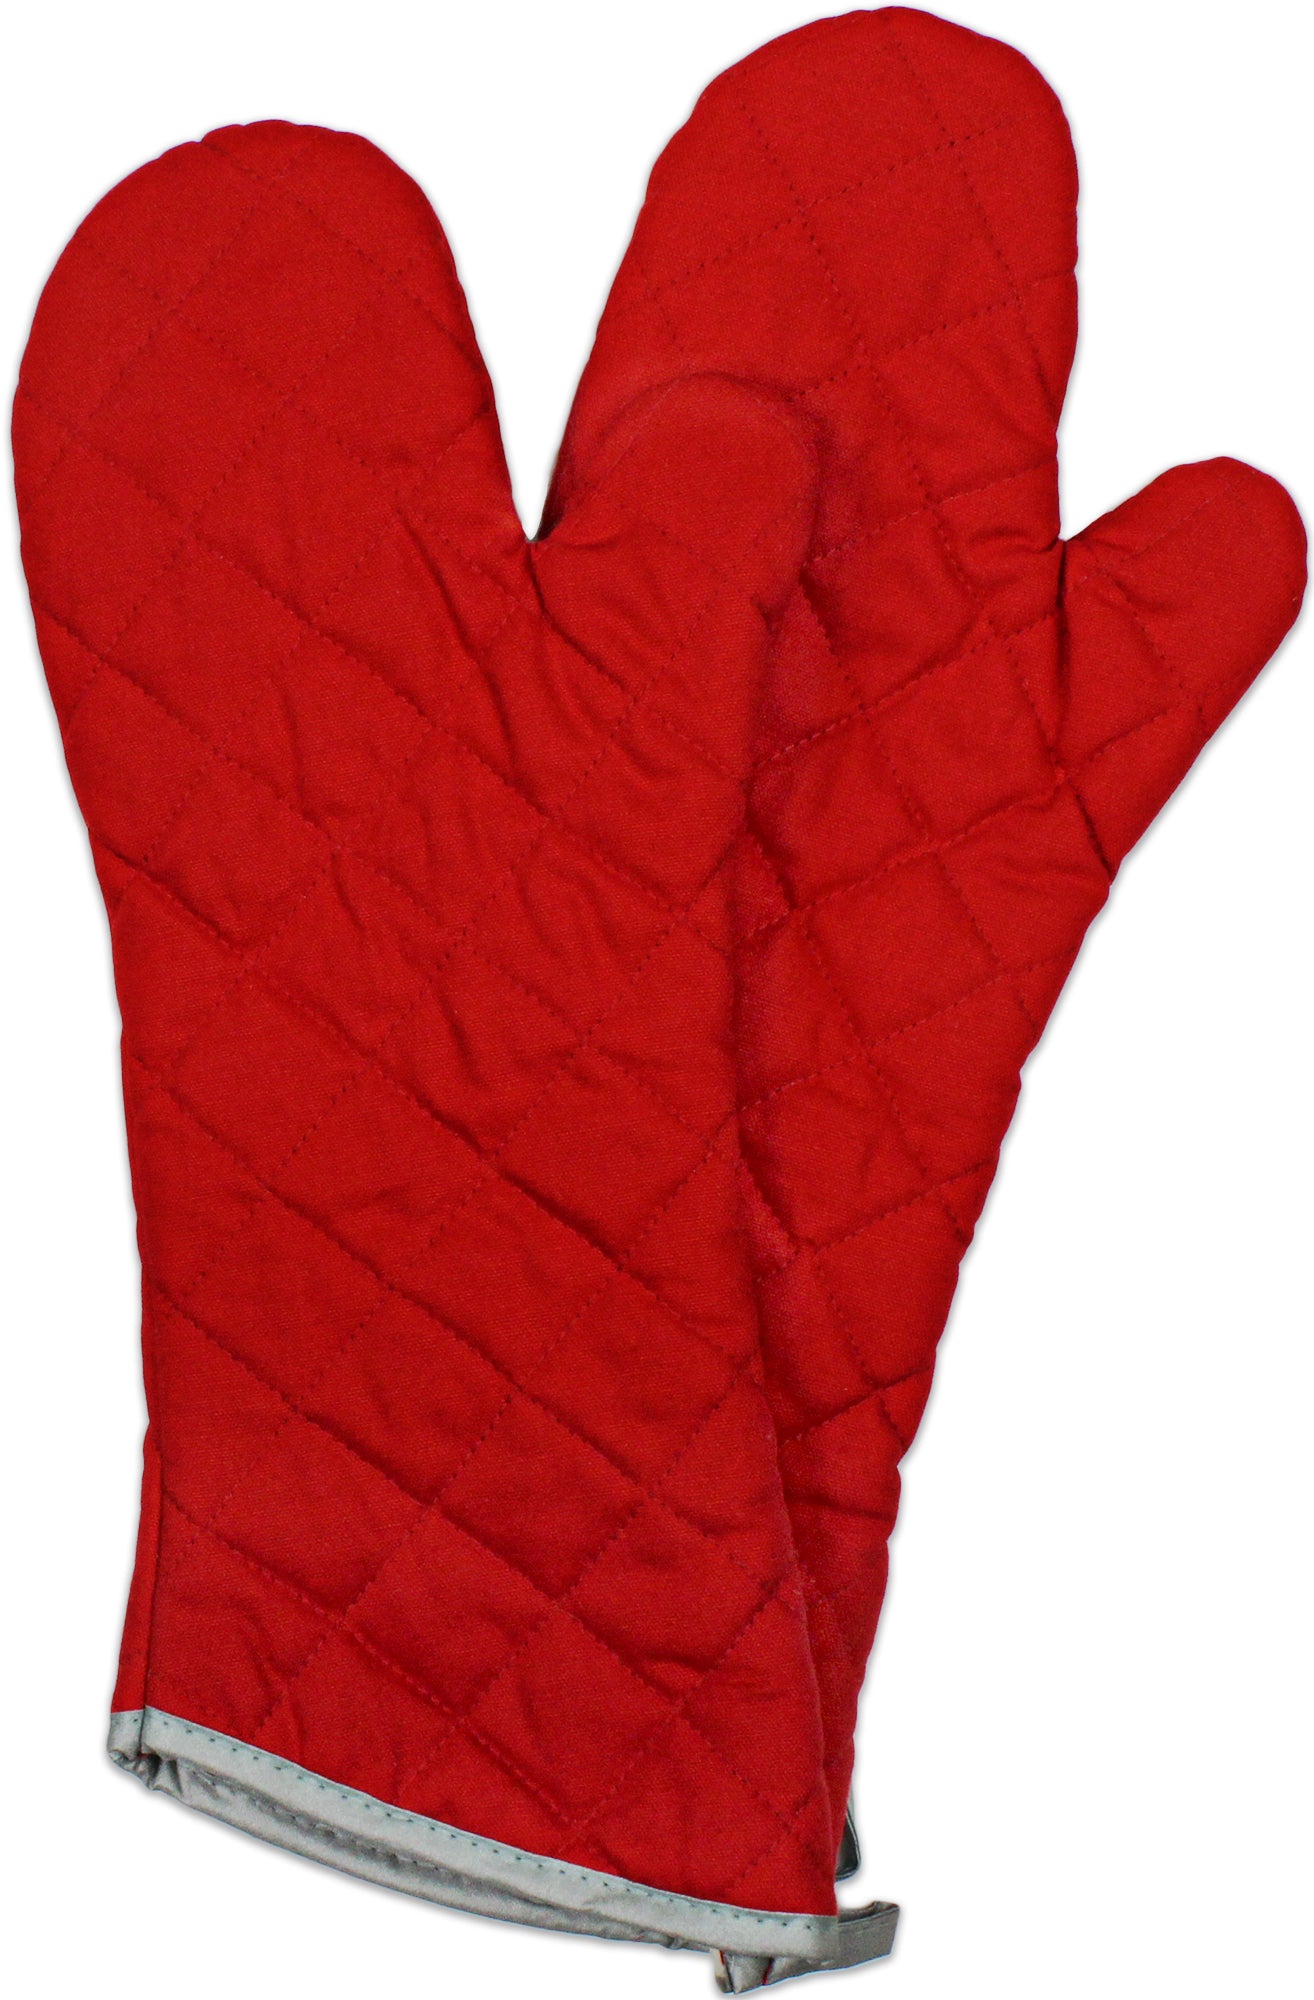 Oven Mitt and Pot Holder Set, Quilted and Flame and Heat Resistant by Lavish Home (Burgundy)